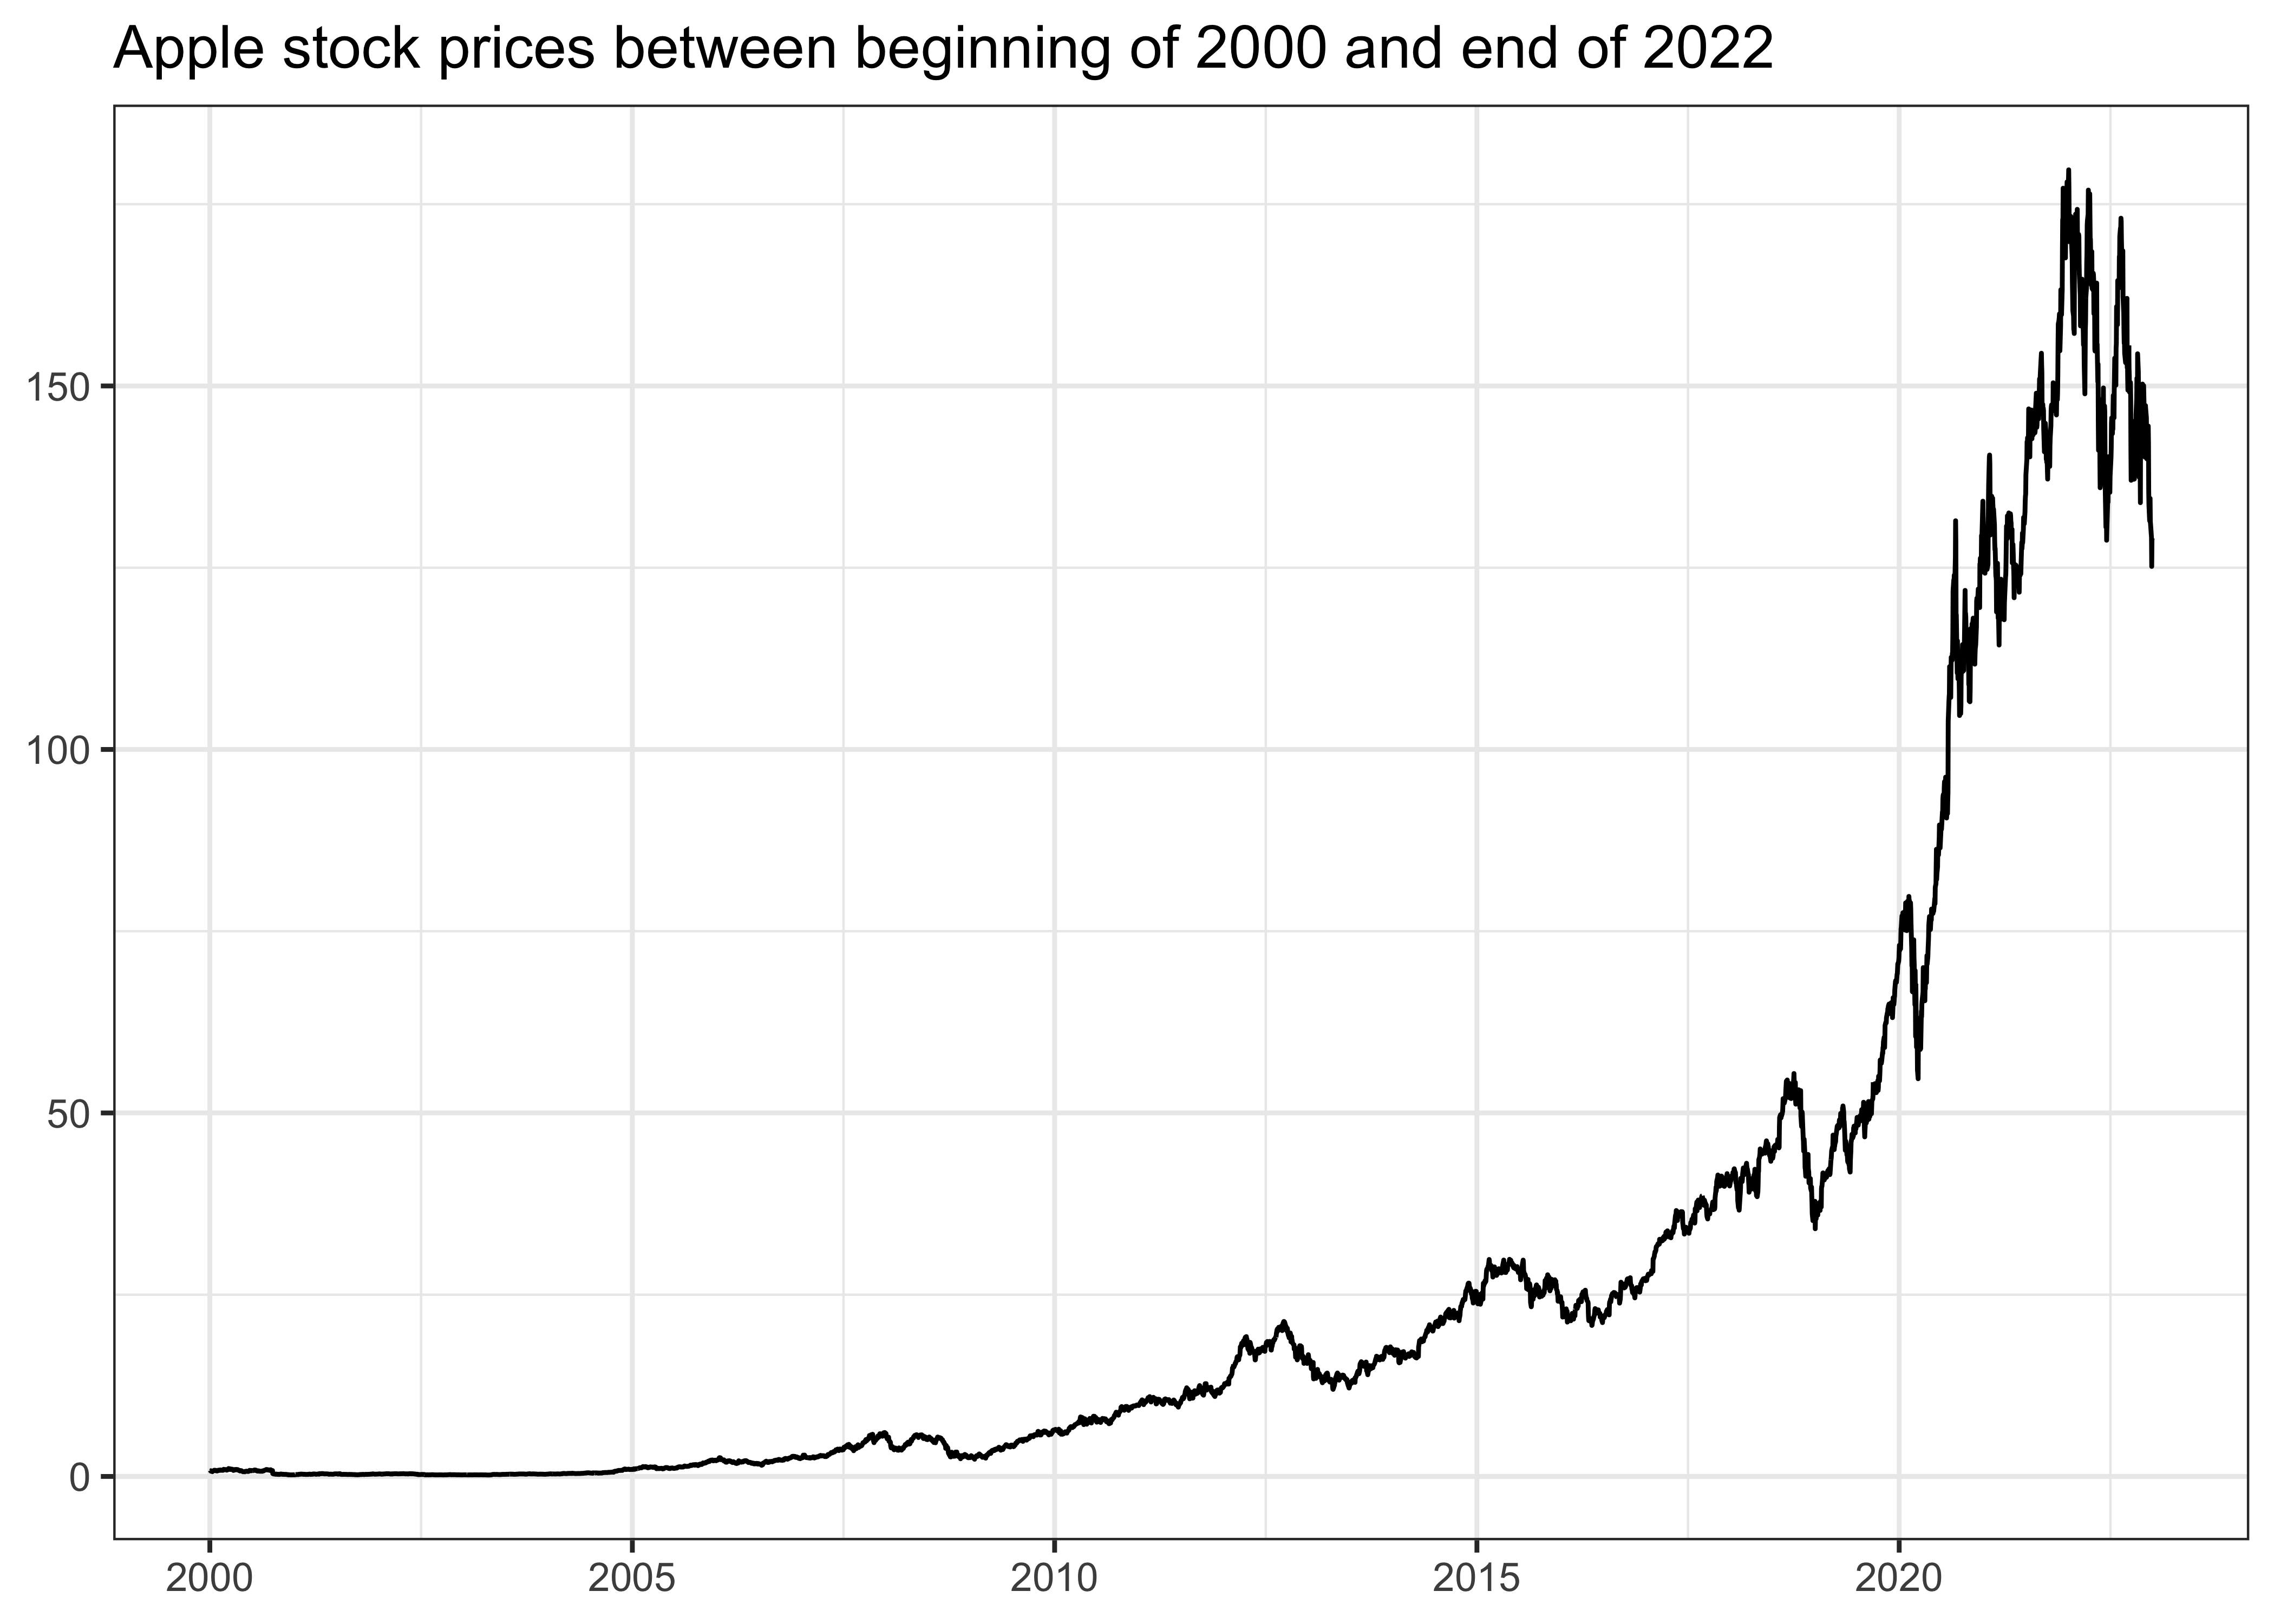 Title: Apple stock prices between the beginning of 2000 and the end of 2022. The figure shows that the stock price of Apple increased dramatically from about 1 USD to around 125 USD.